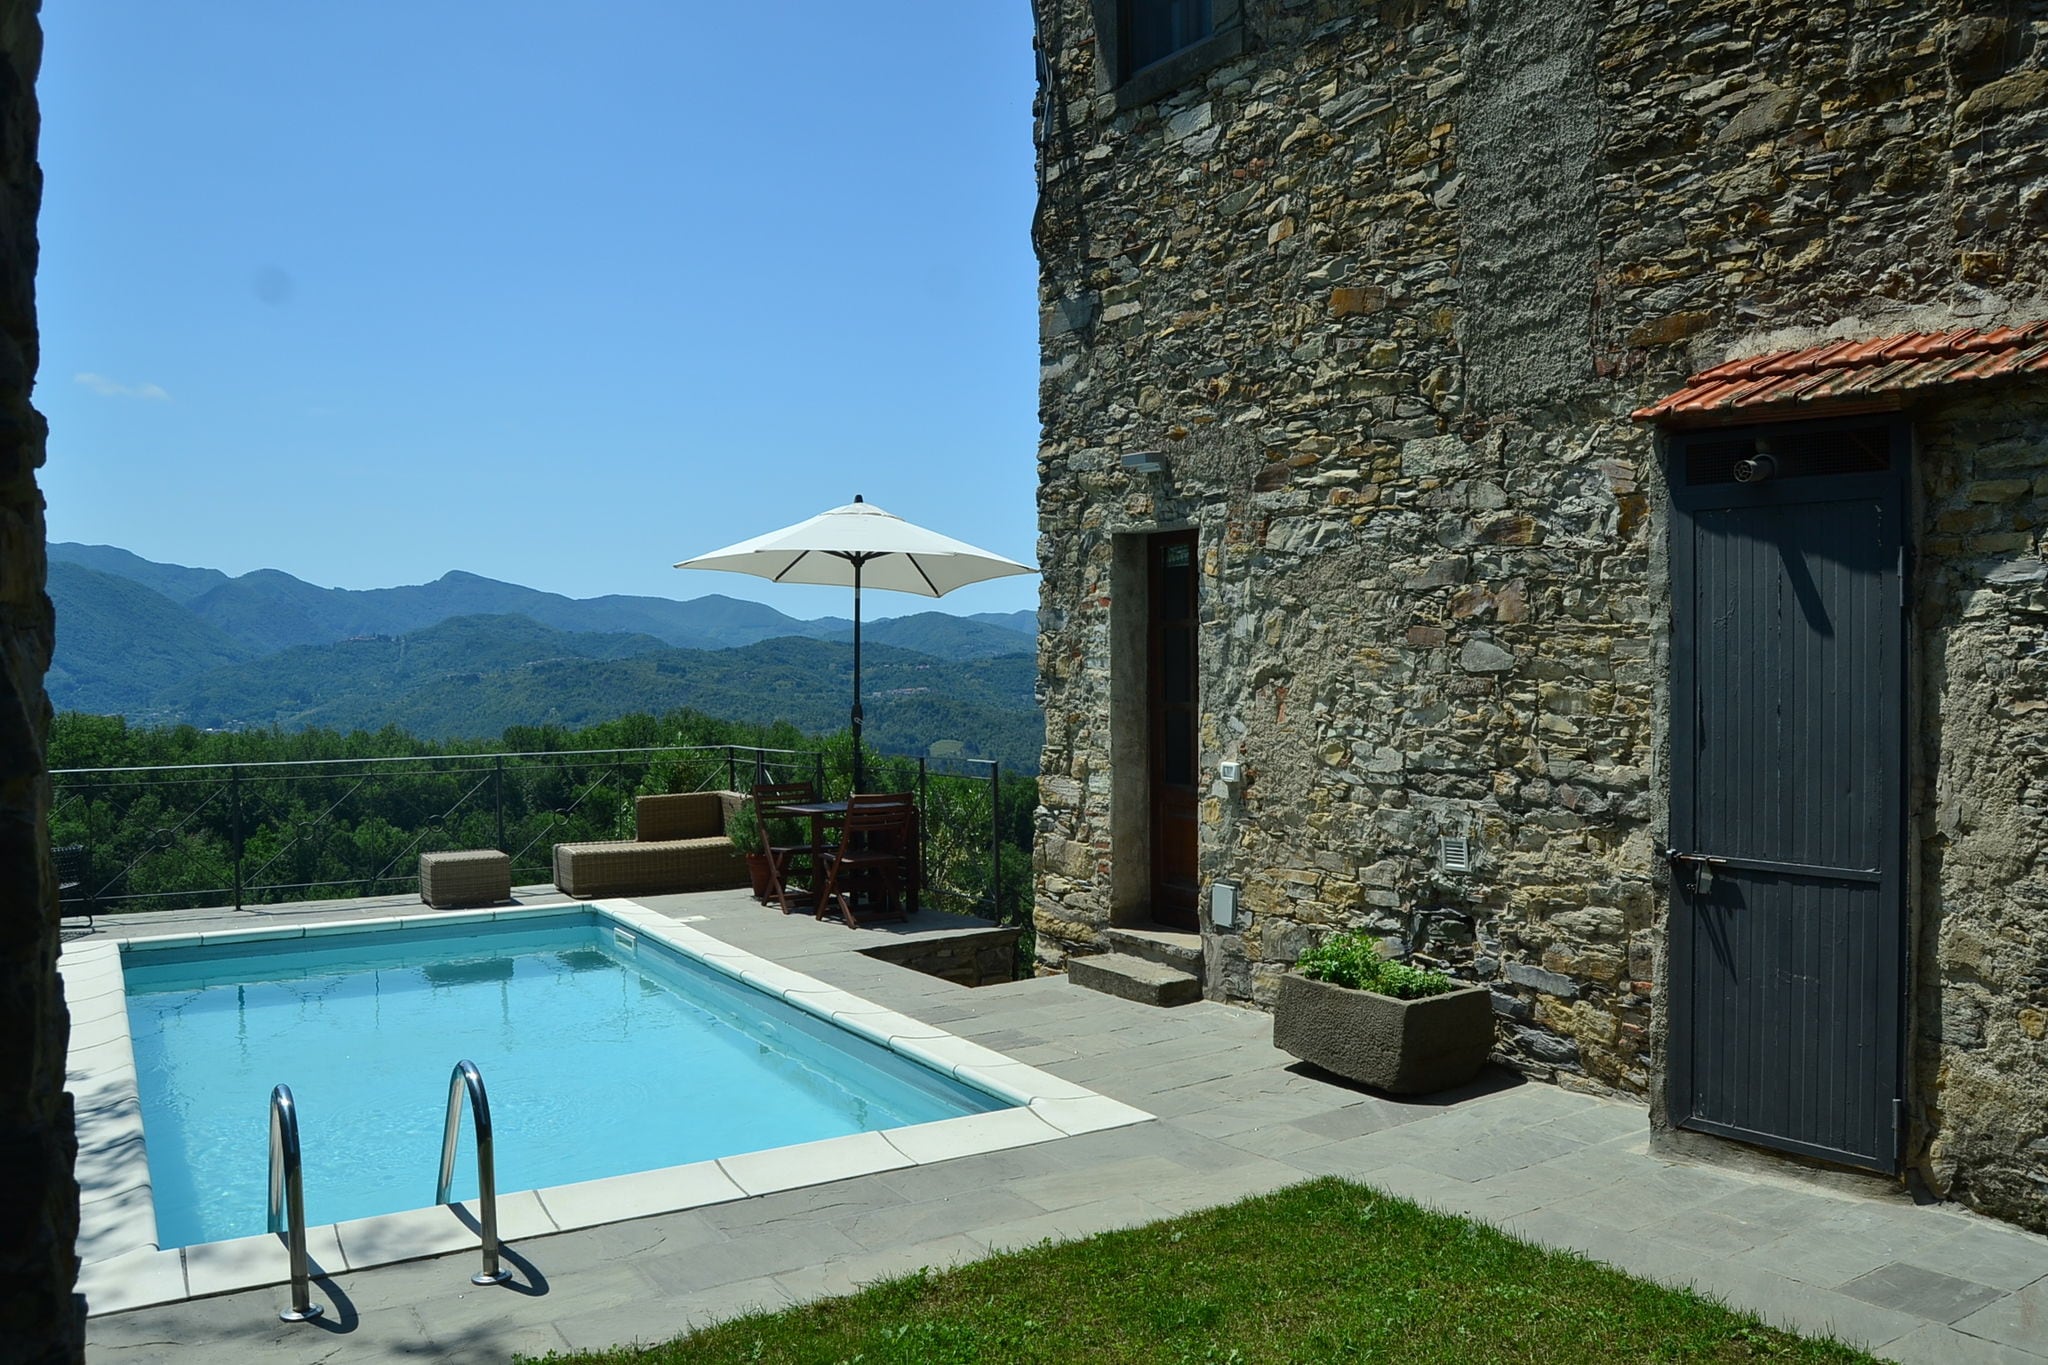 Historic Cottage in Fivizzano with Swimming Pool